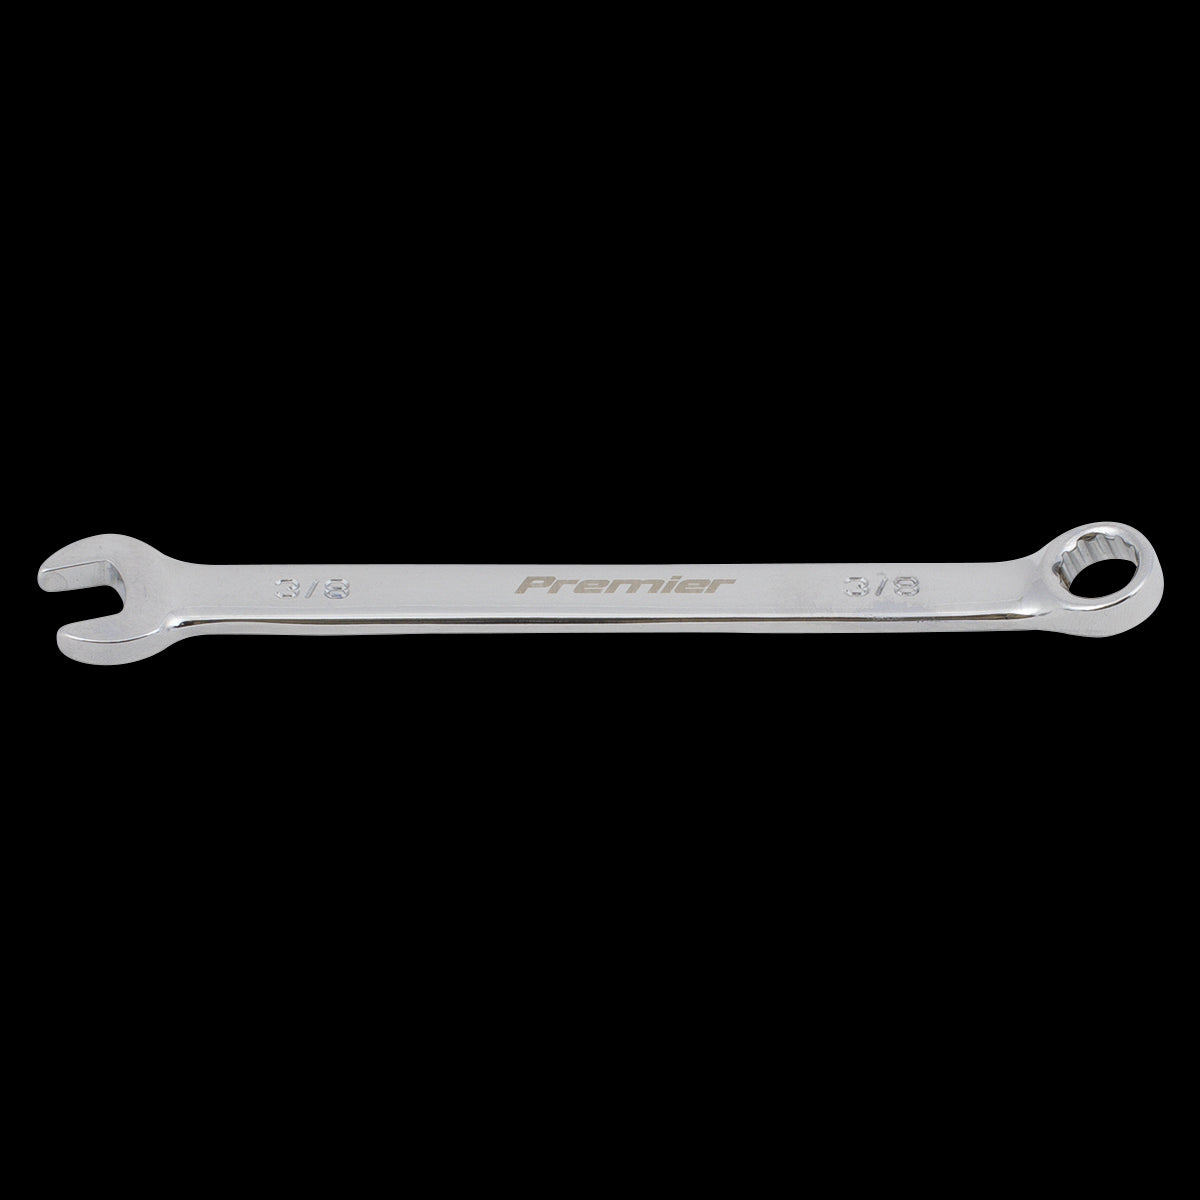 Sealey Premier Combination Spanner 3/8" - Imperial